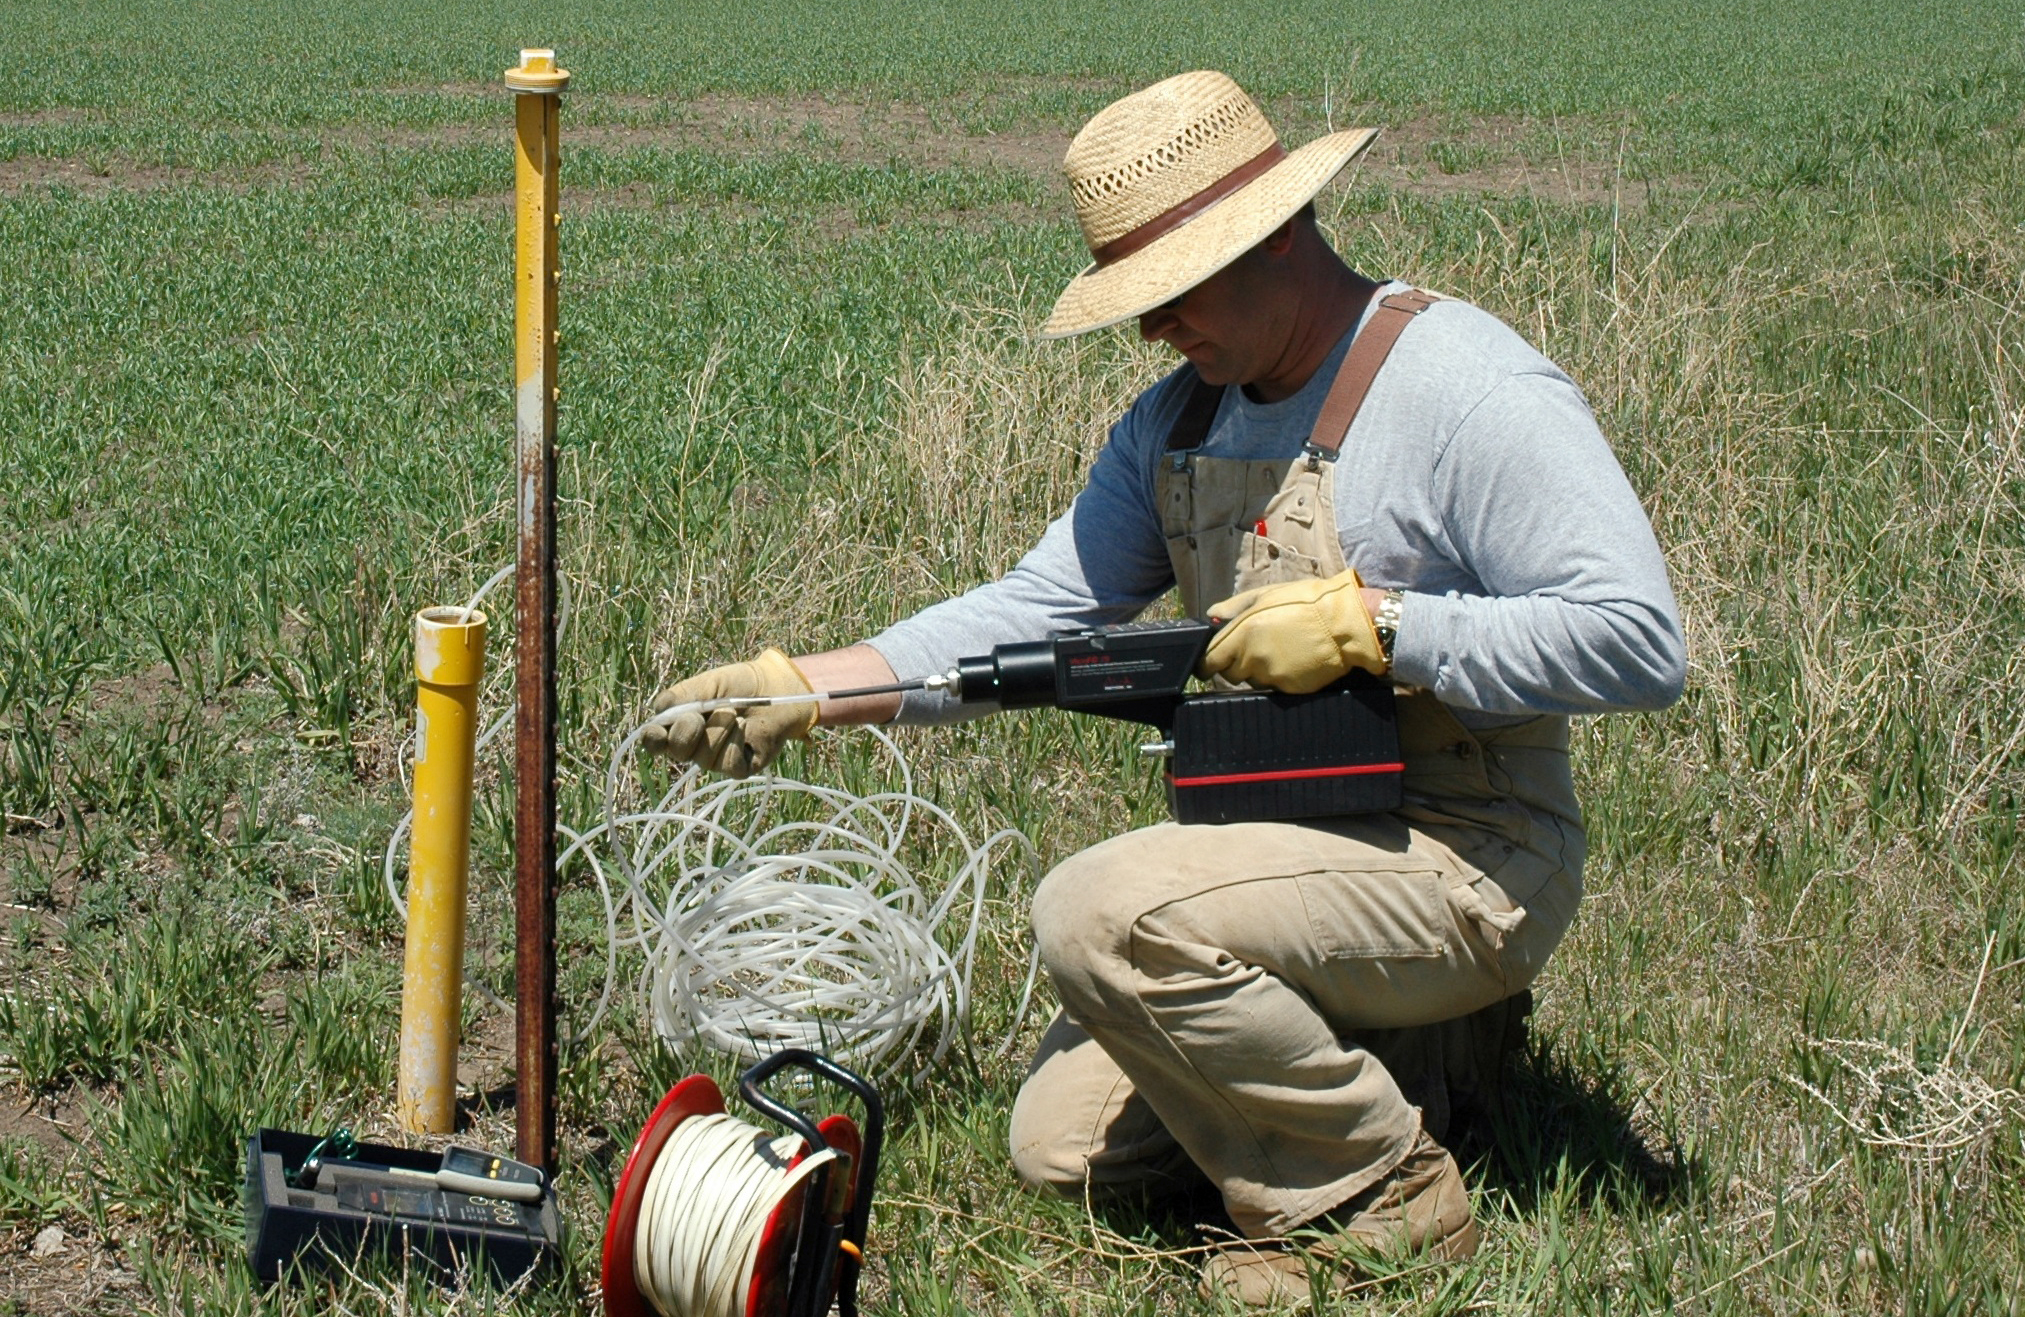 A man using electrical instruments, holding tubing while kneeling in the grass..